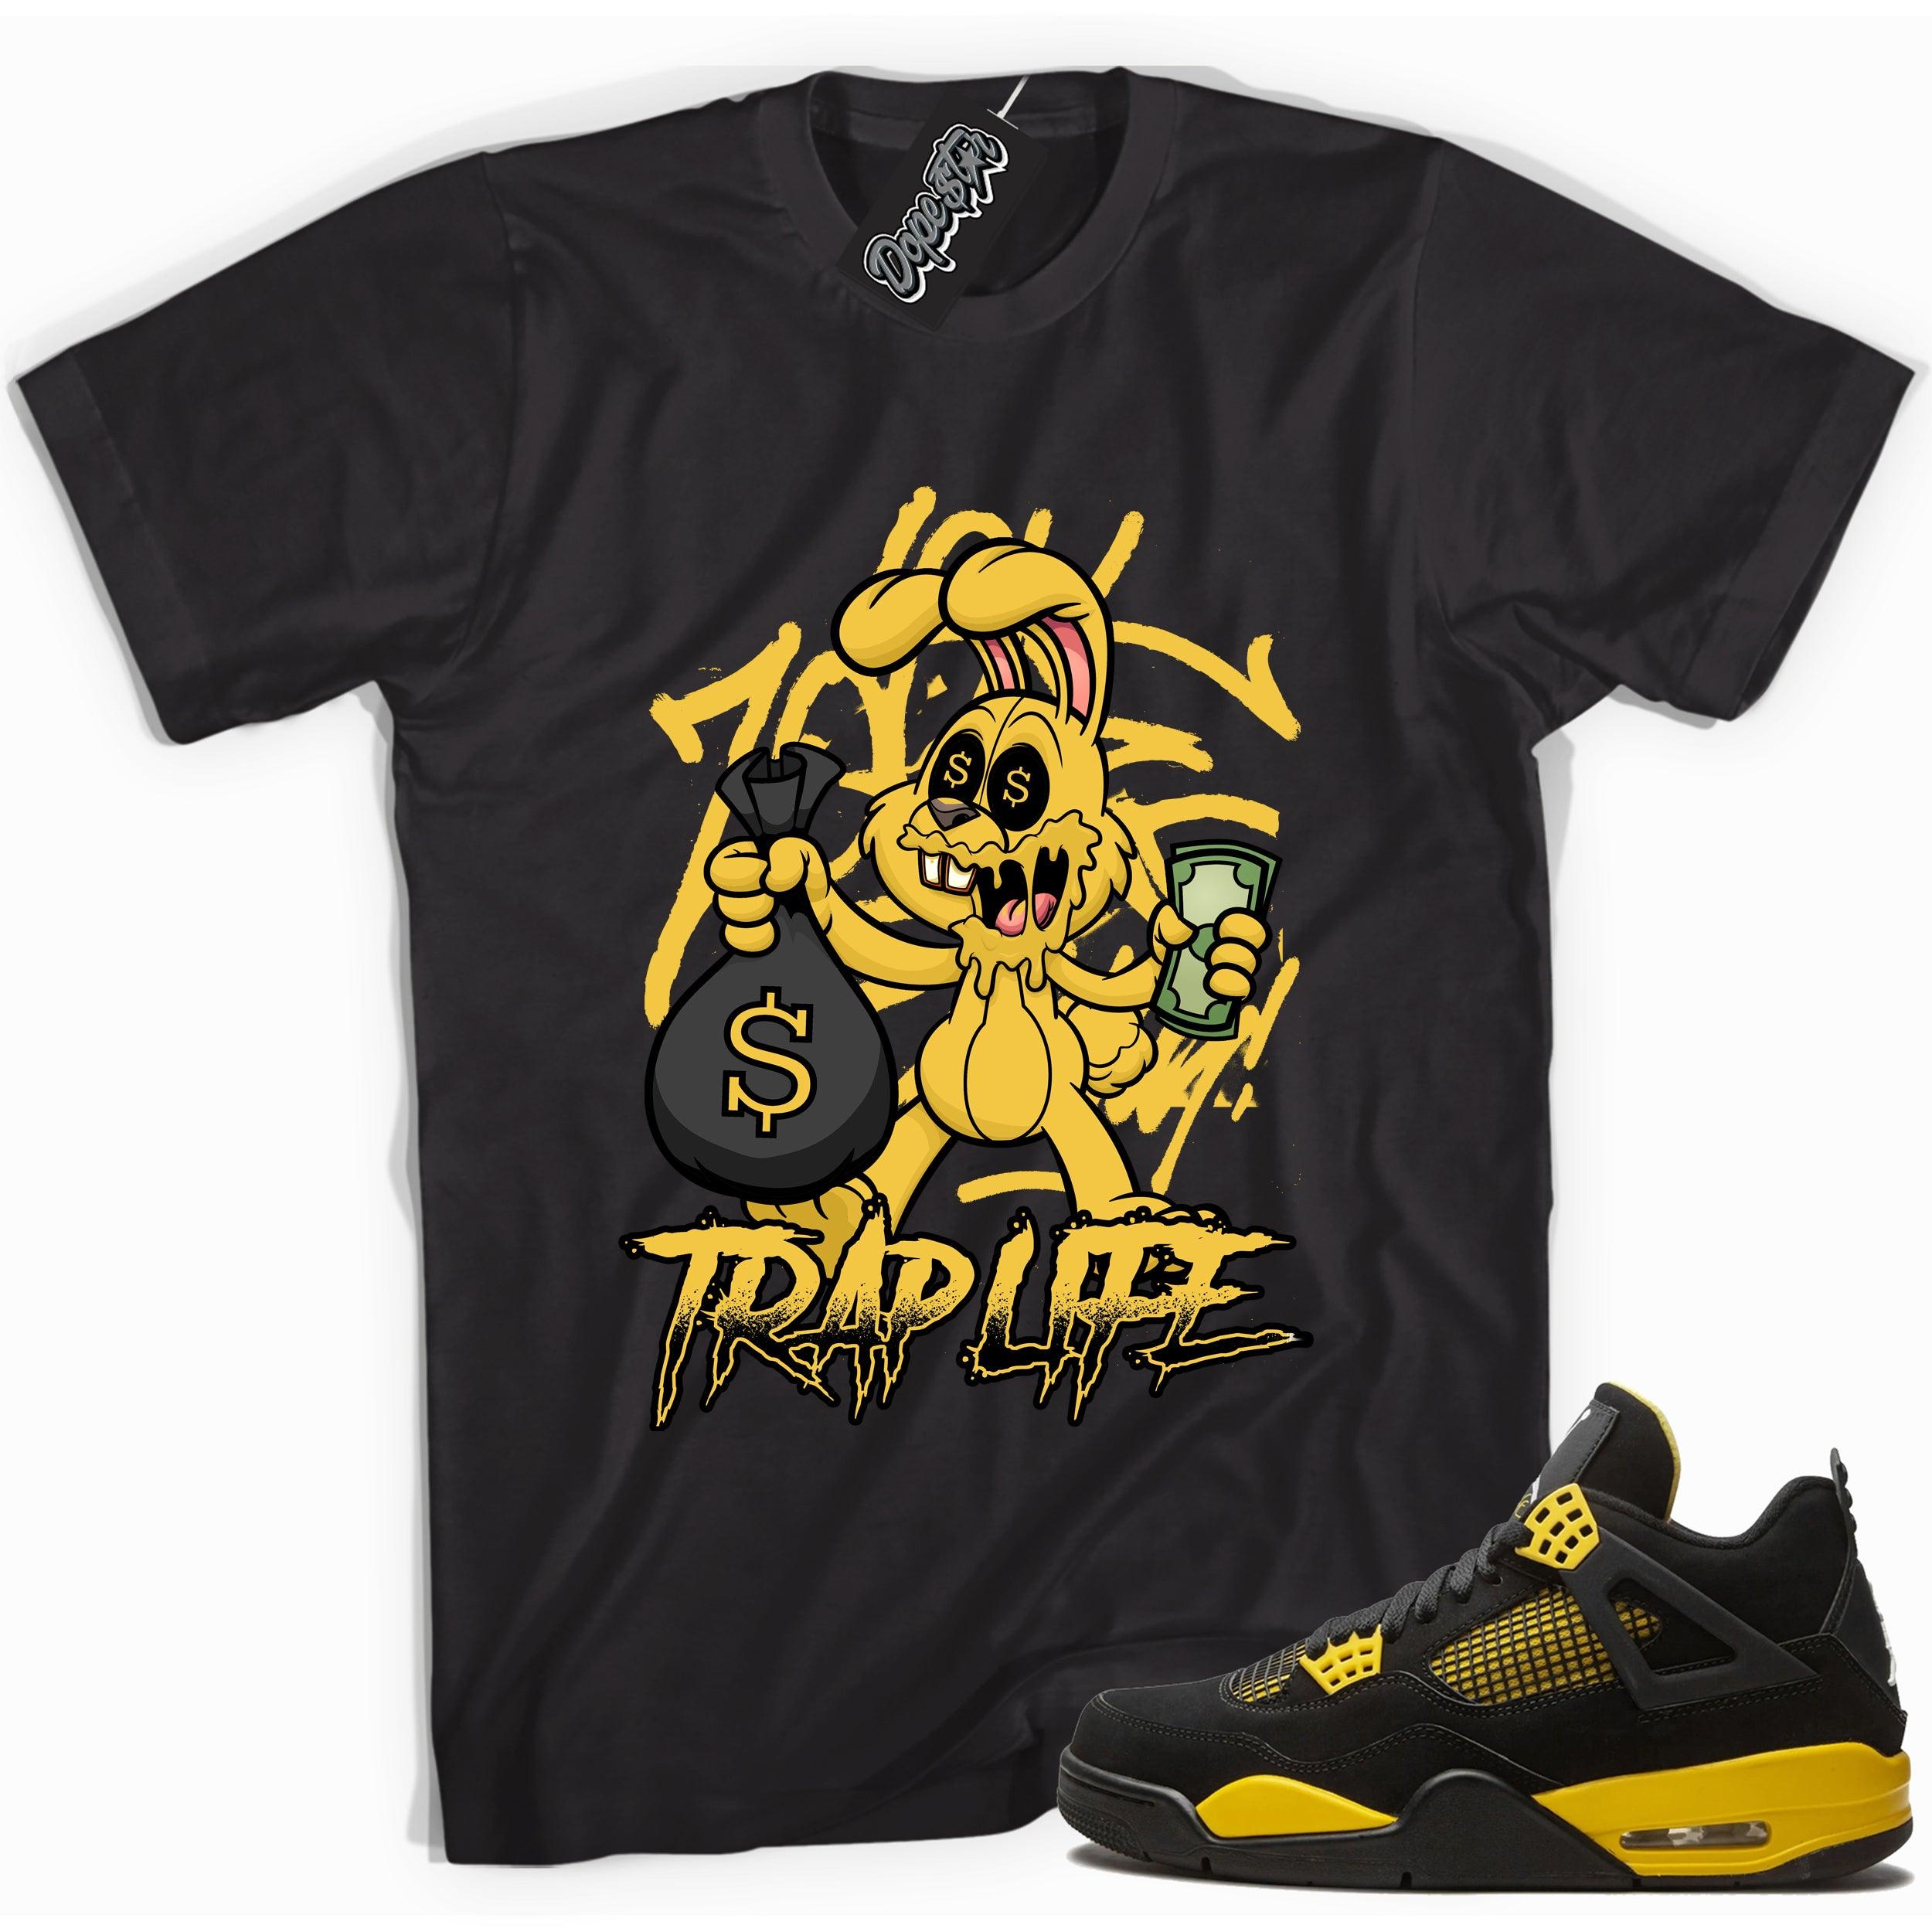 Cool black graphic tee with 'trap rabbit' print, that perfectly matches  Air Jordan 4 Thunder sneakers